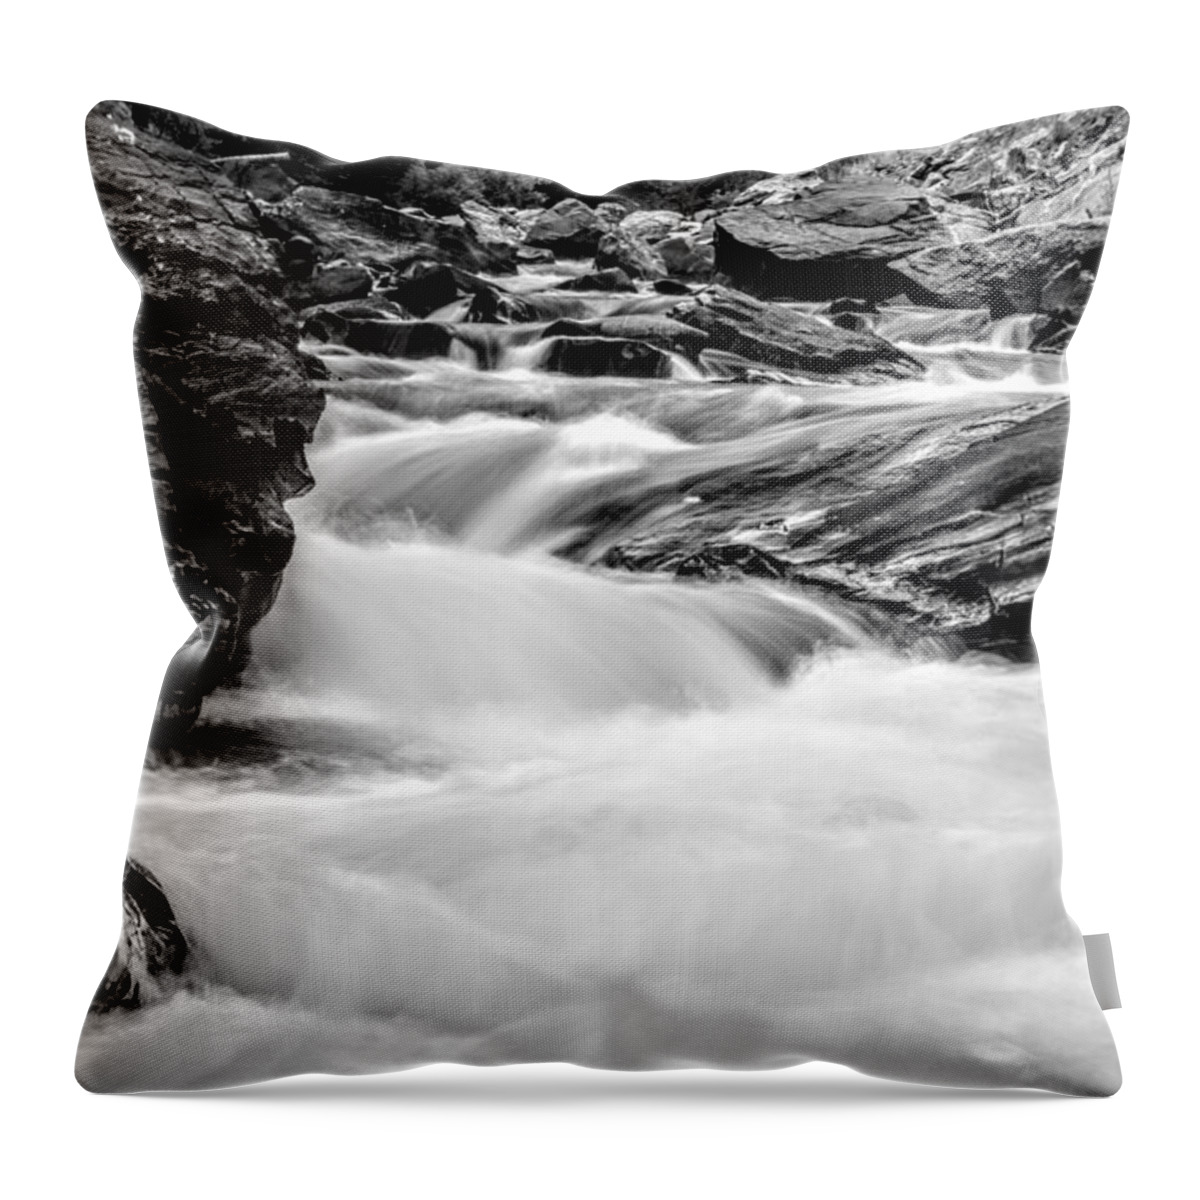 Rushing Water Throw Pillow featuring the photograph Rushing Through Time by Michael Brungardt